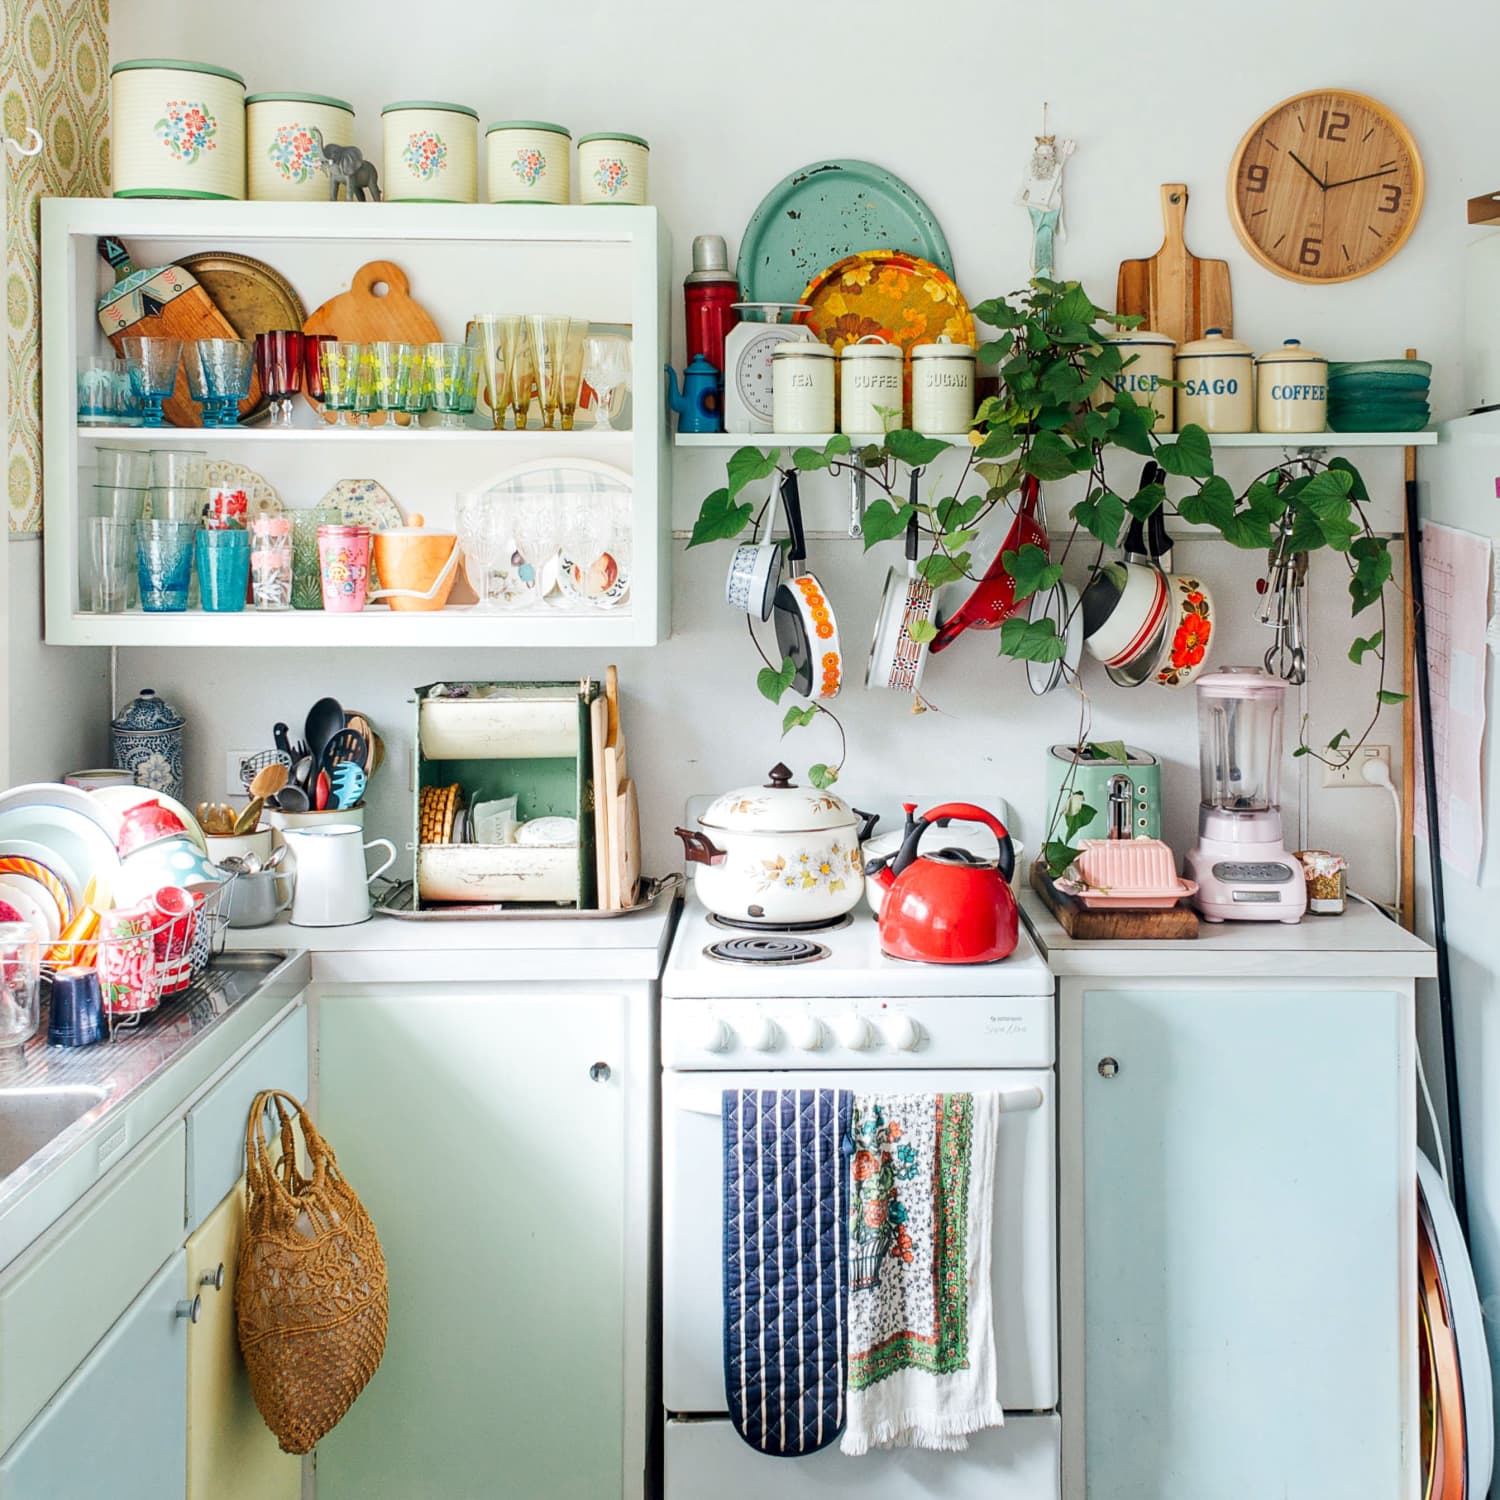 20 Smart Storage Ideas to Declutter Countertops Around Your House